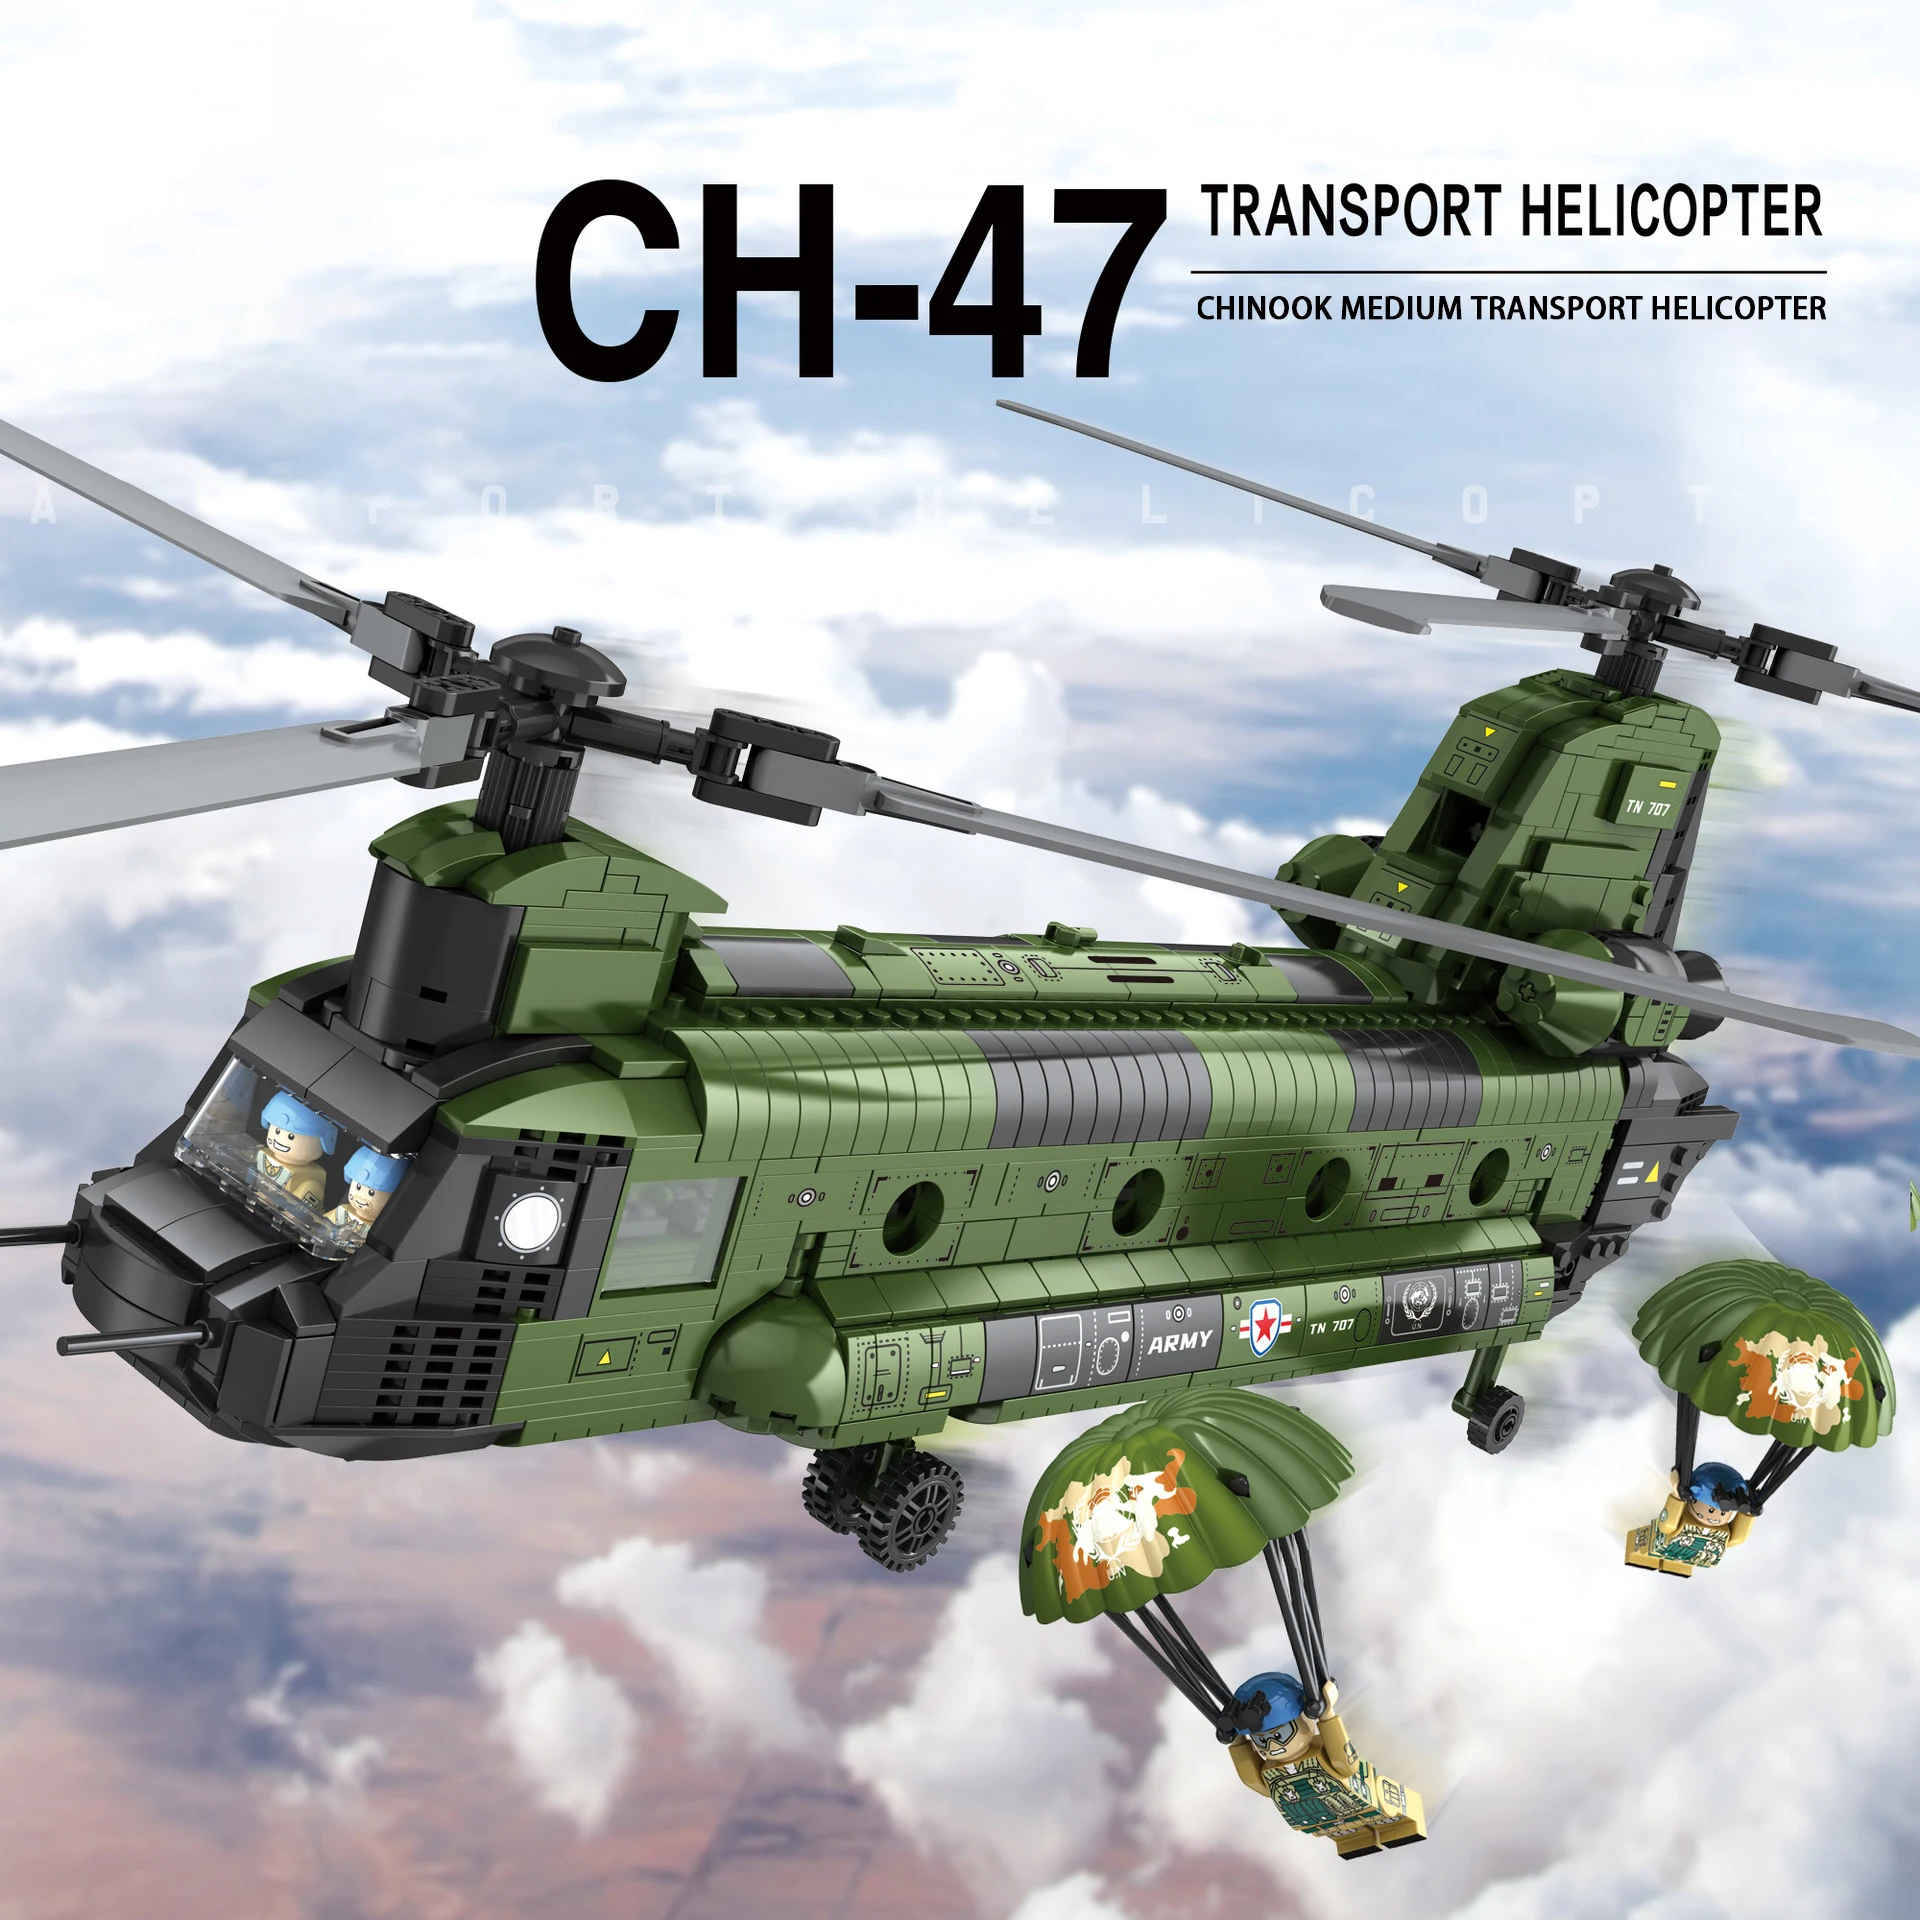 

World War City CH-47 Transport Helicopter Model Chinook Technical Building Blocks Weapon Airplane Bricks DIY Gifts Toys For Kids